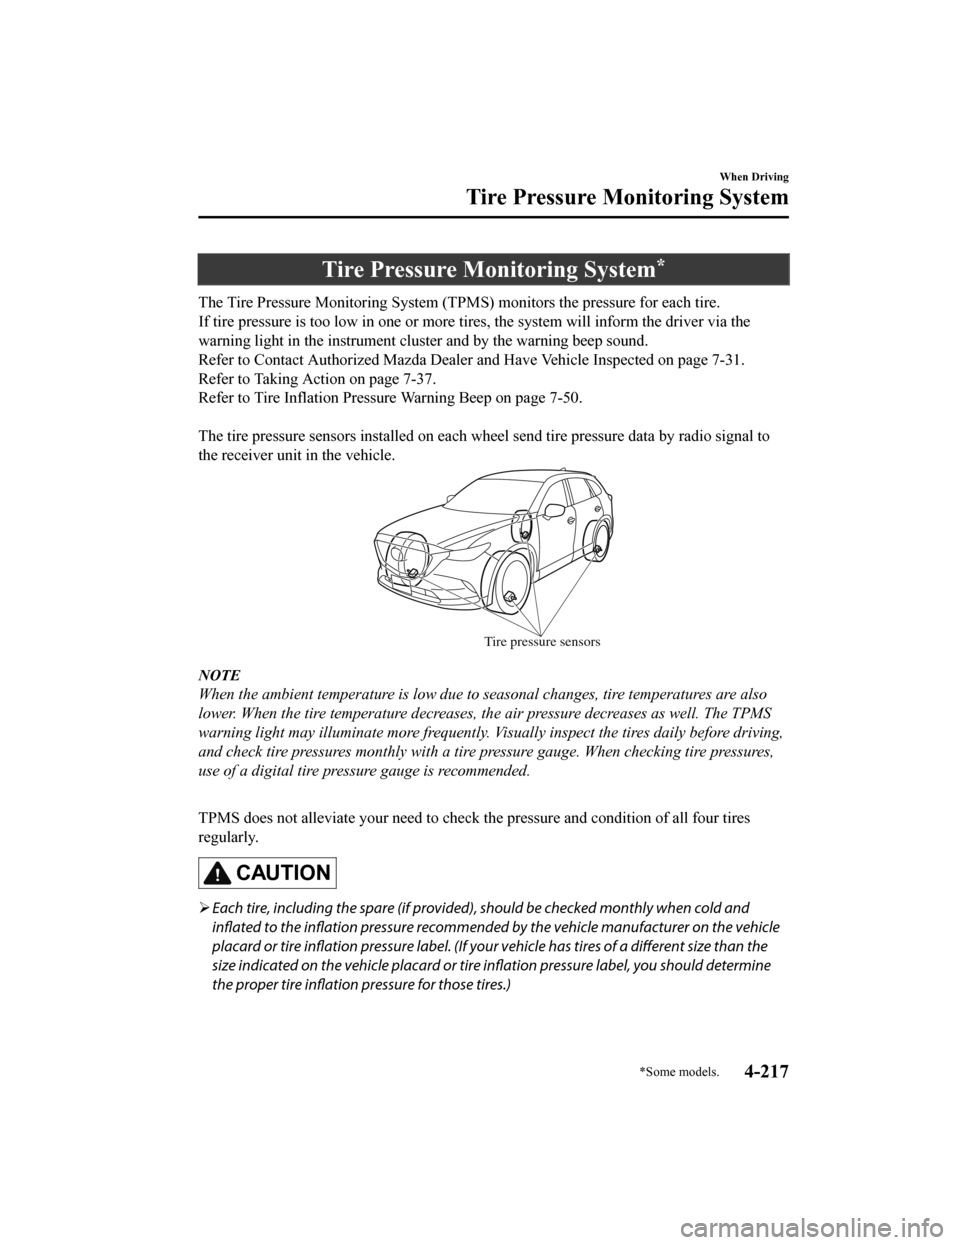 MAZDA MODEL CX-9 2020  Owners Manual (in English) Tire Pressure Monitoring System*
The Tire Pressure Monitoring System (TPMS) monitors the pressure for each tire.
If tire pressure is too low in one or more t ires, the system will inform the driver vi